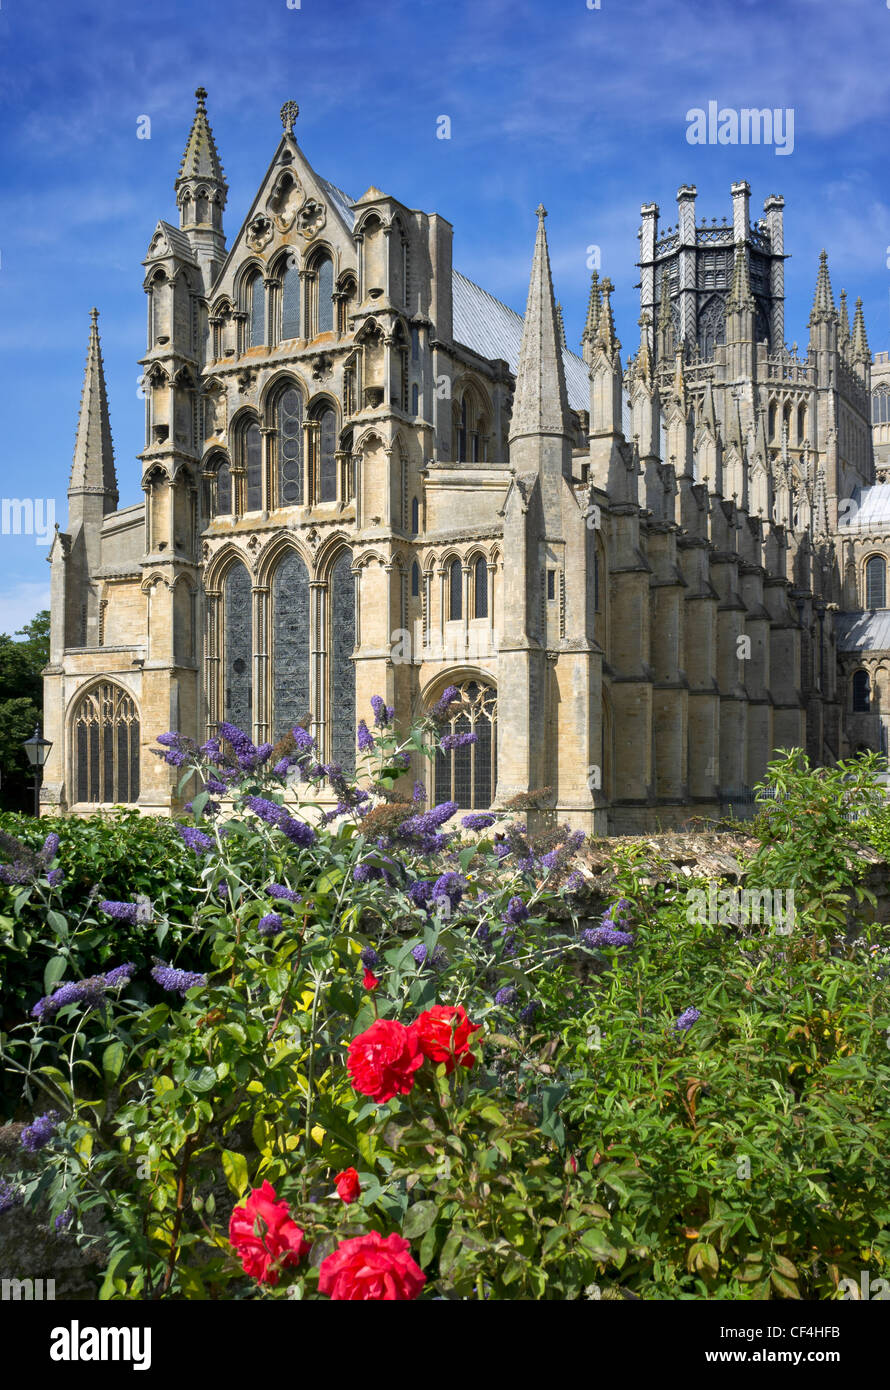 Flowers blooming in front of Ely Cathedral, known locally as 'the ship of the Fens', in Summer. Stock Photo